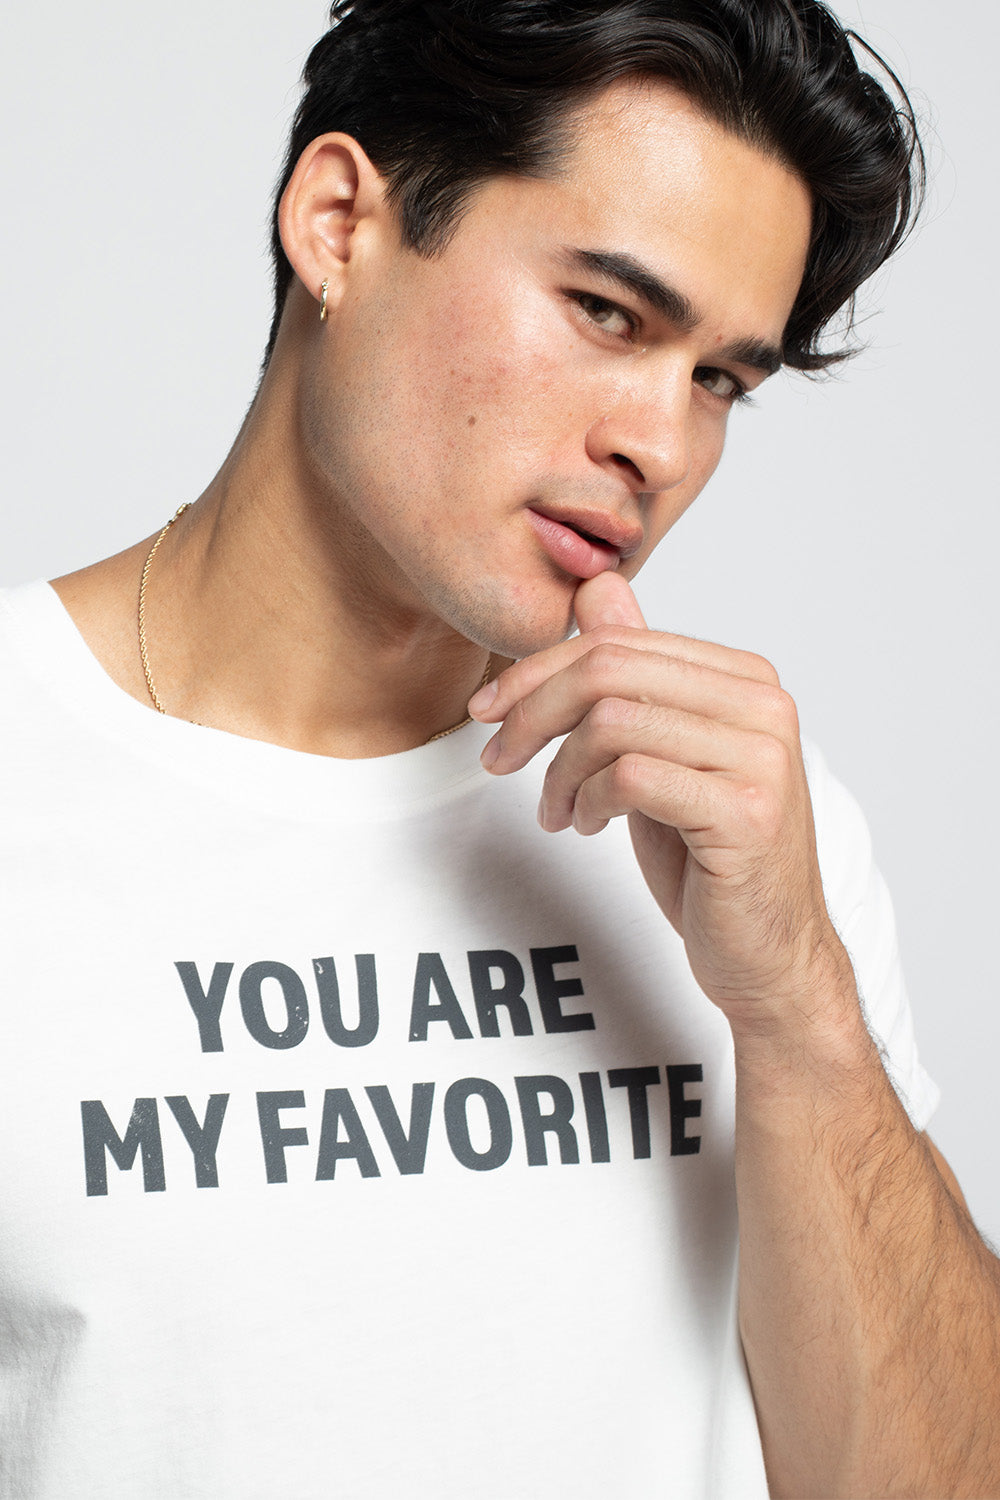 You Are My Favorite Fitted Tee